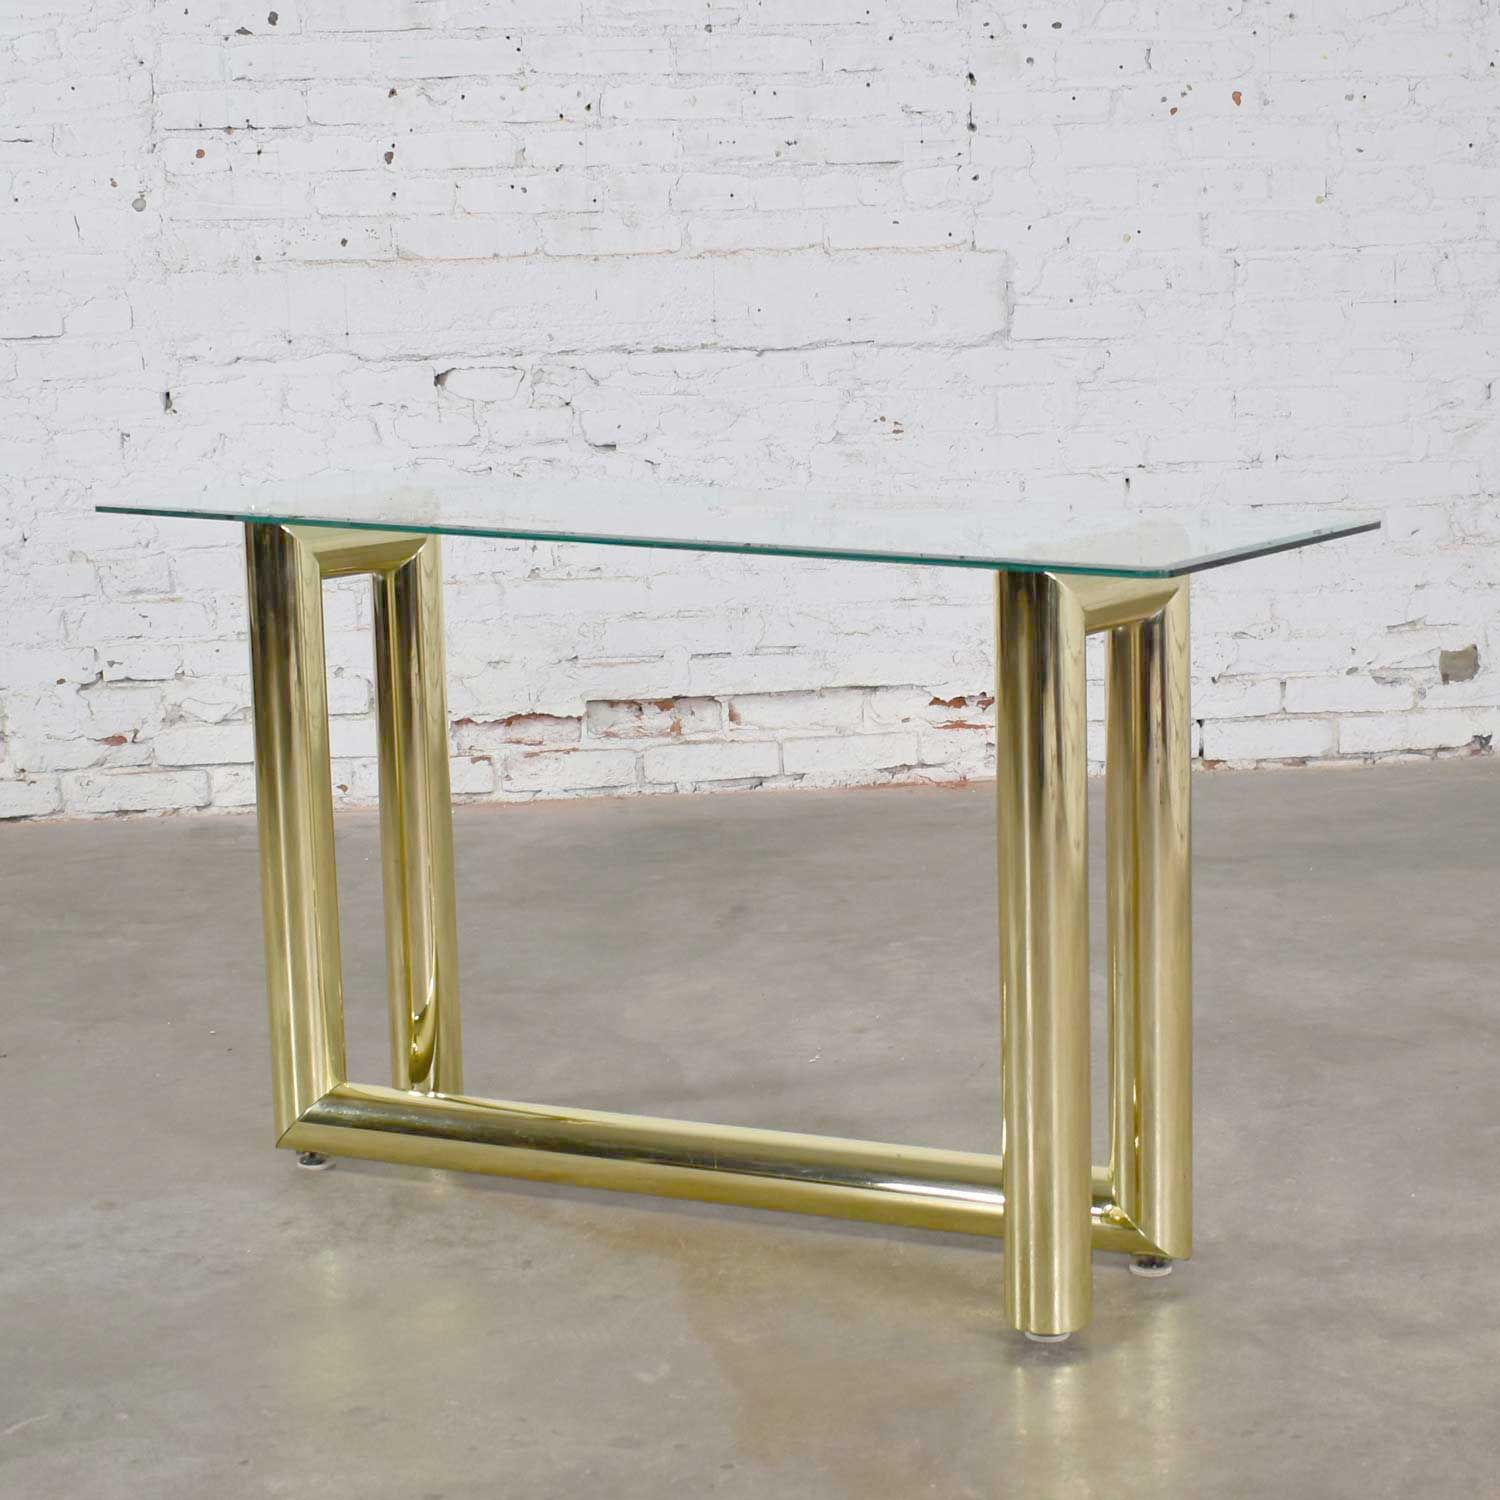 Vintage 1970s Modern Brass Plate Console Sofa Table With Intended For Hammered Antique Brass Modern Console Tables (View 9 of 20)